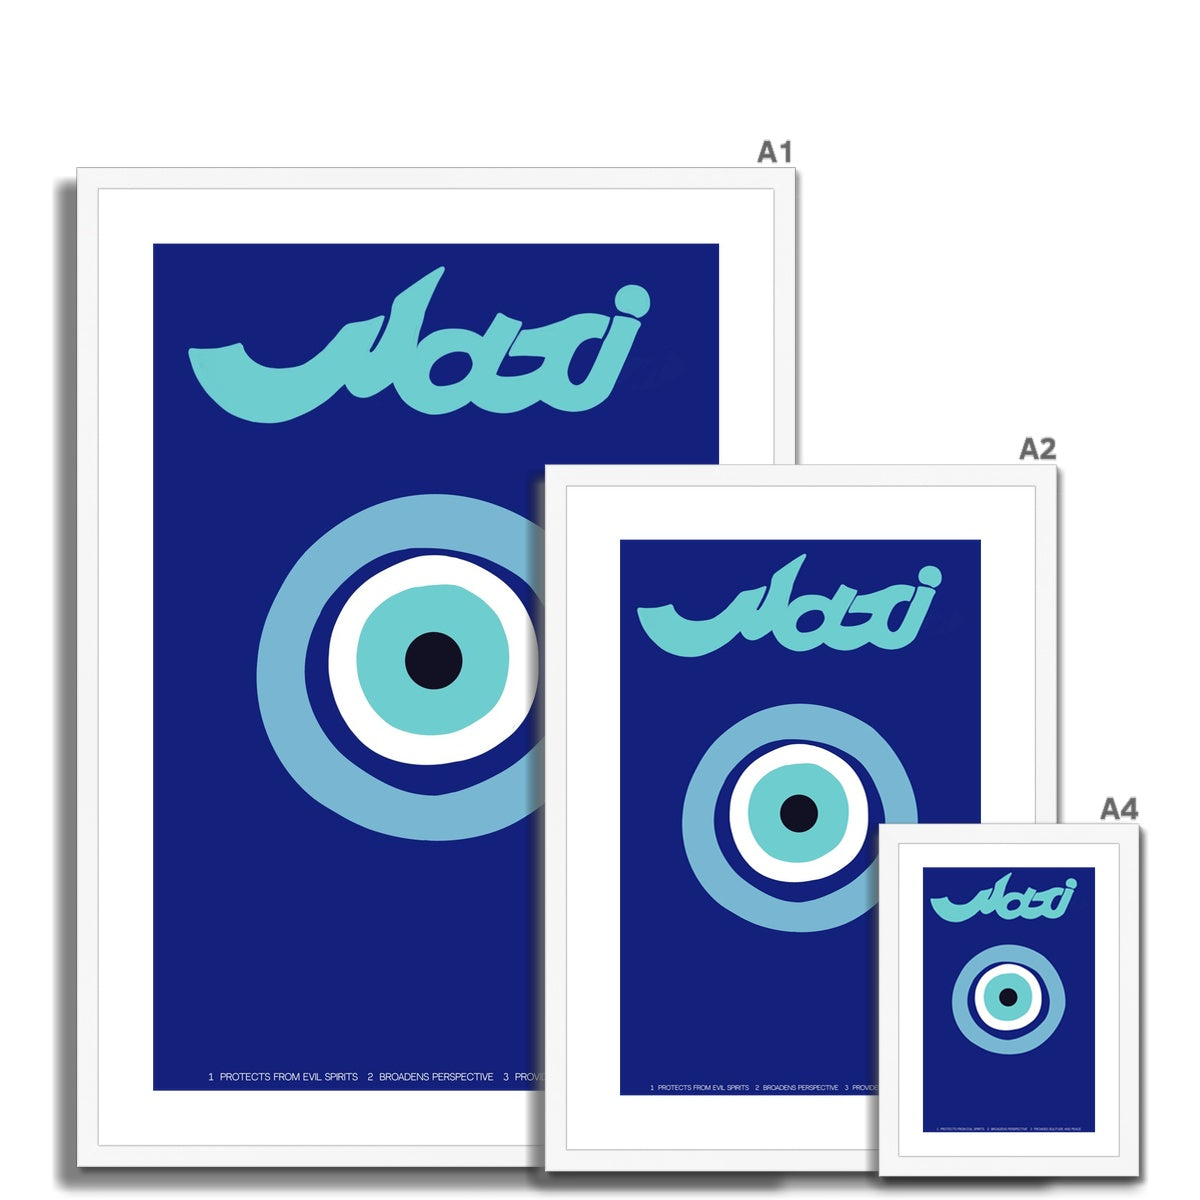 © les muses / Evil eye wall art prints inspired from the Greek islands of Santorini and Mykonos.
Colorful summer posters that make cute dorm and apartment decor.